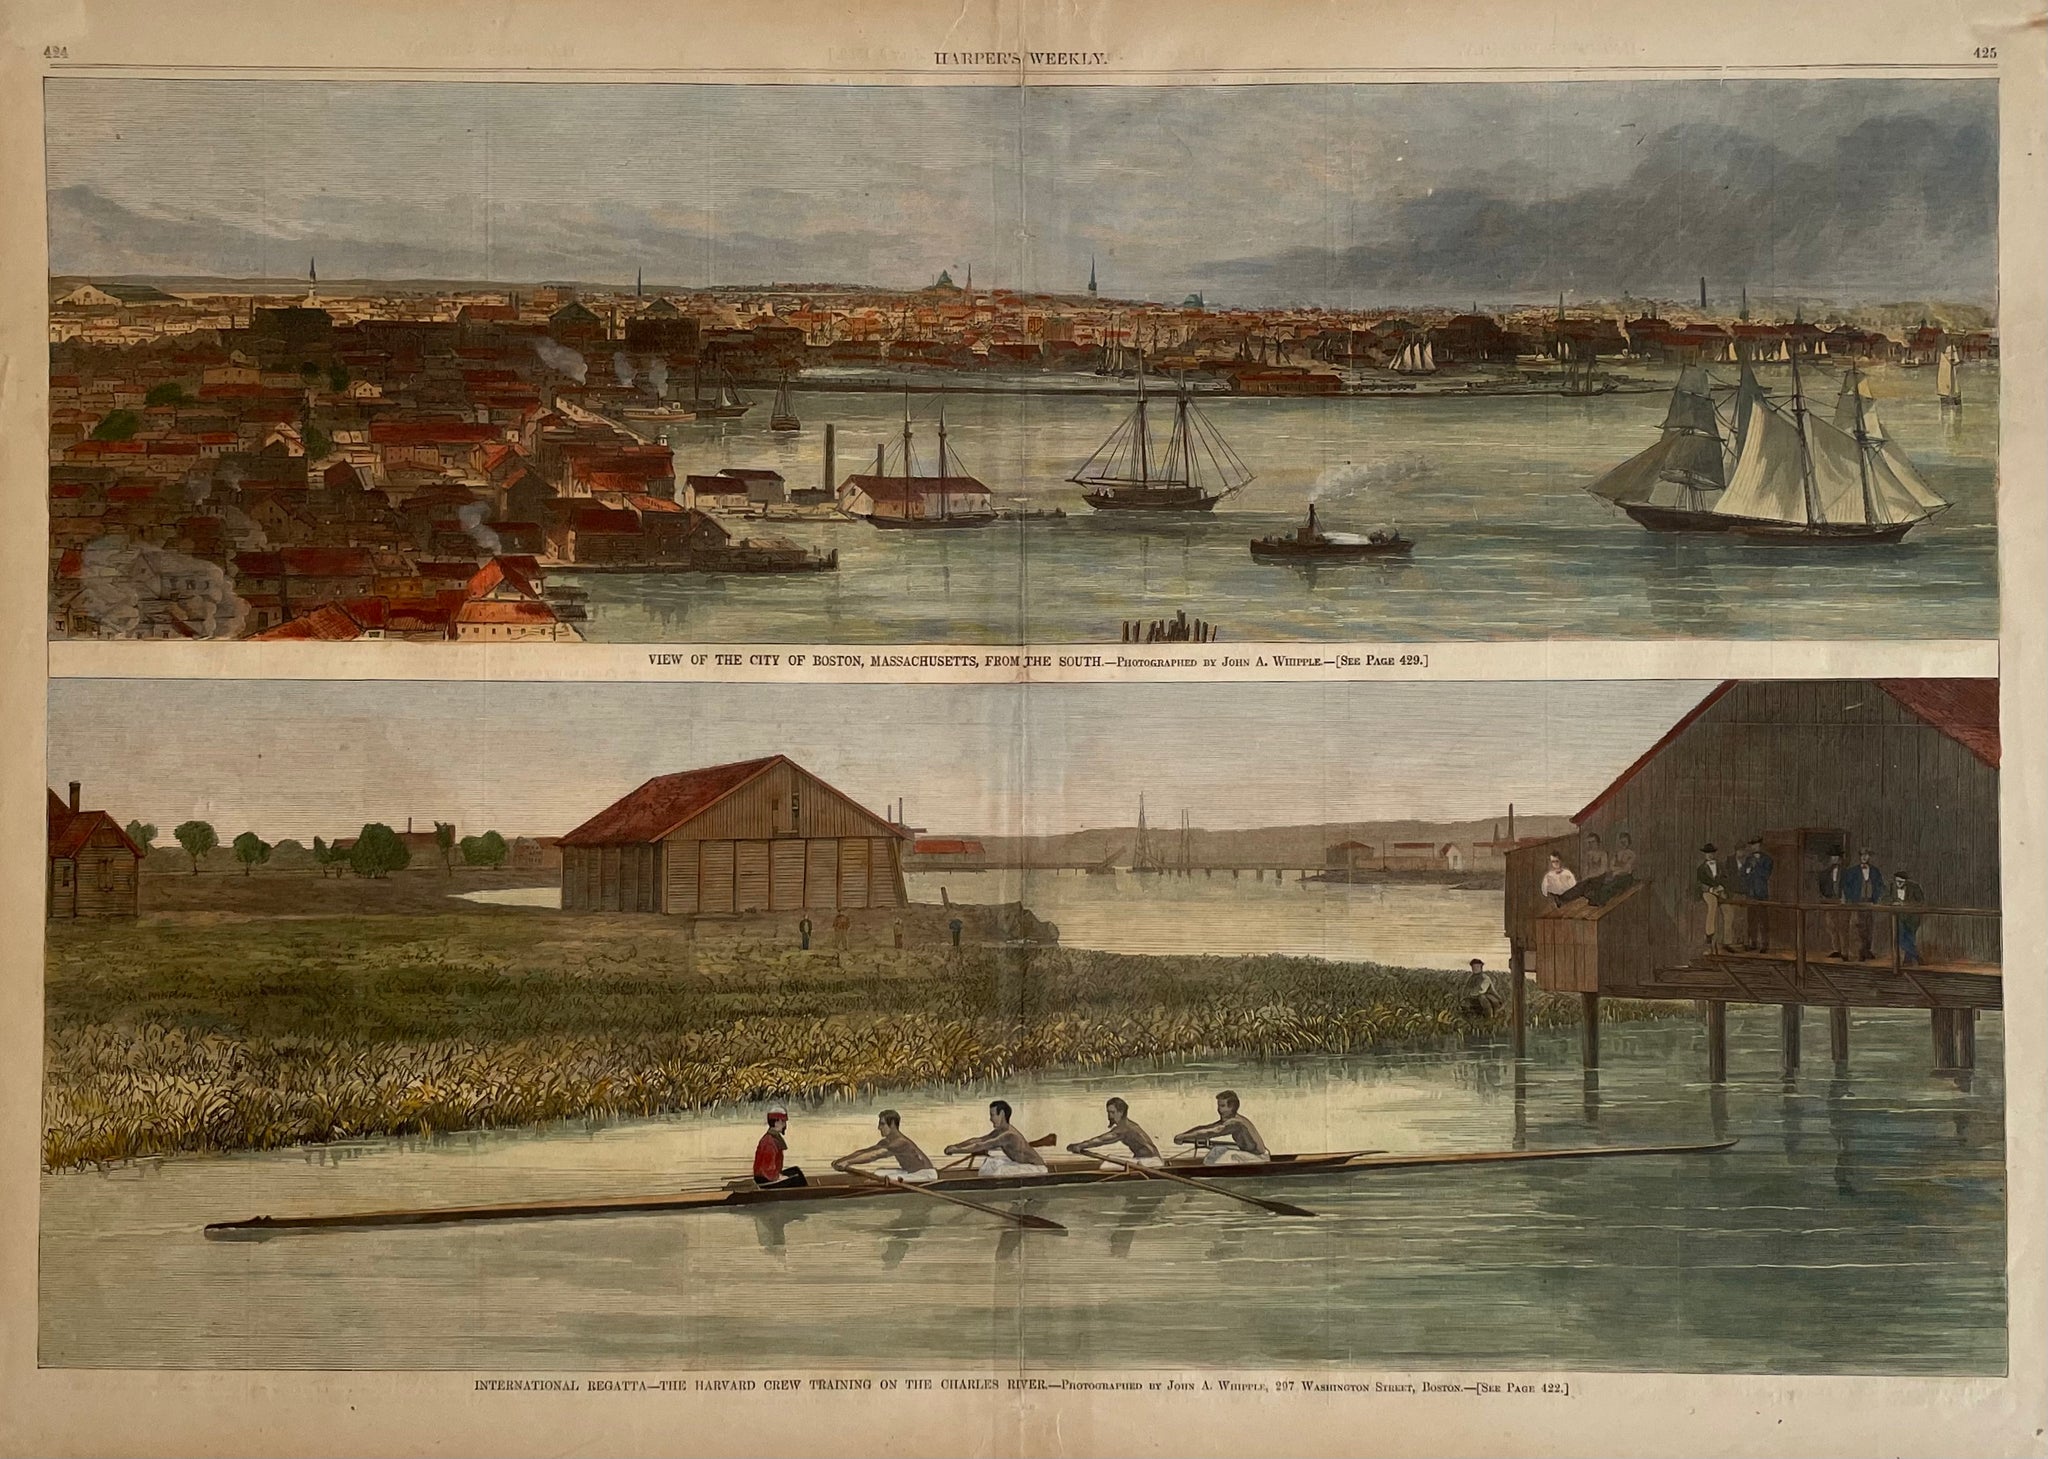 Top image. View of the City of Boston, Massachusetts, from the South. Bottom image: International Regatta - The Harvard Crew Training on the Charles River.  Wood engraving after a photograph by John A. Whipple from "Harper's Weekly", July 3, 1869. Modern hand coloring.